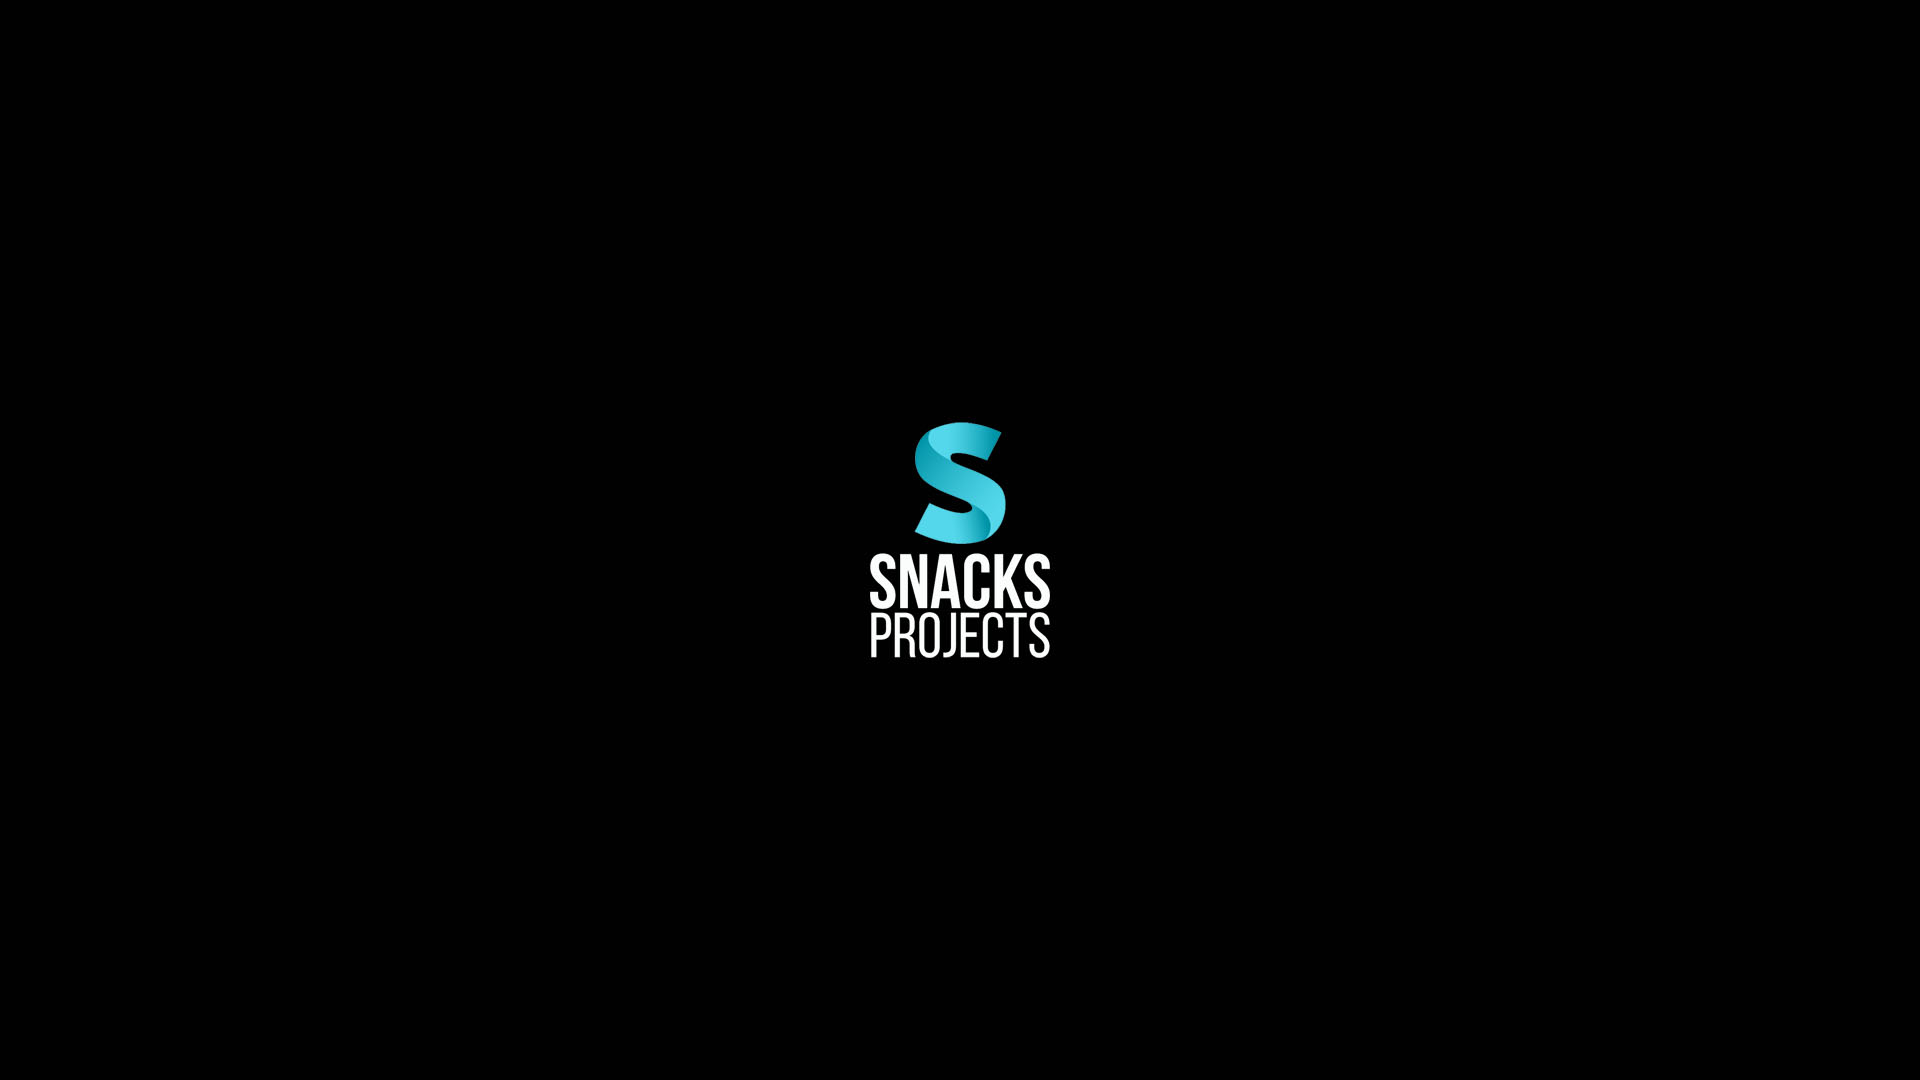 SNACKS PROJECTS